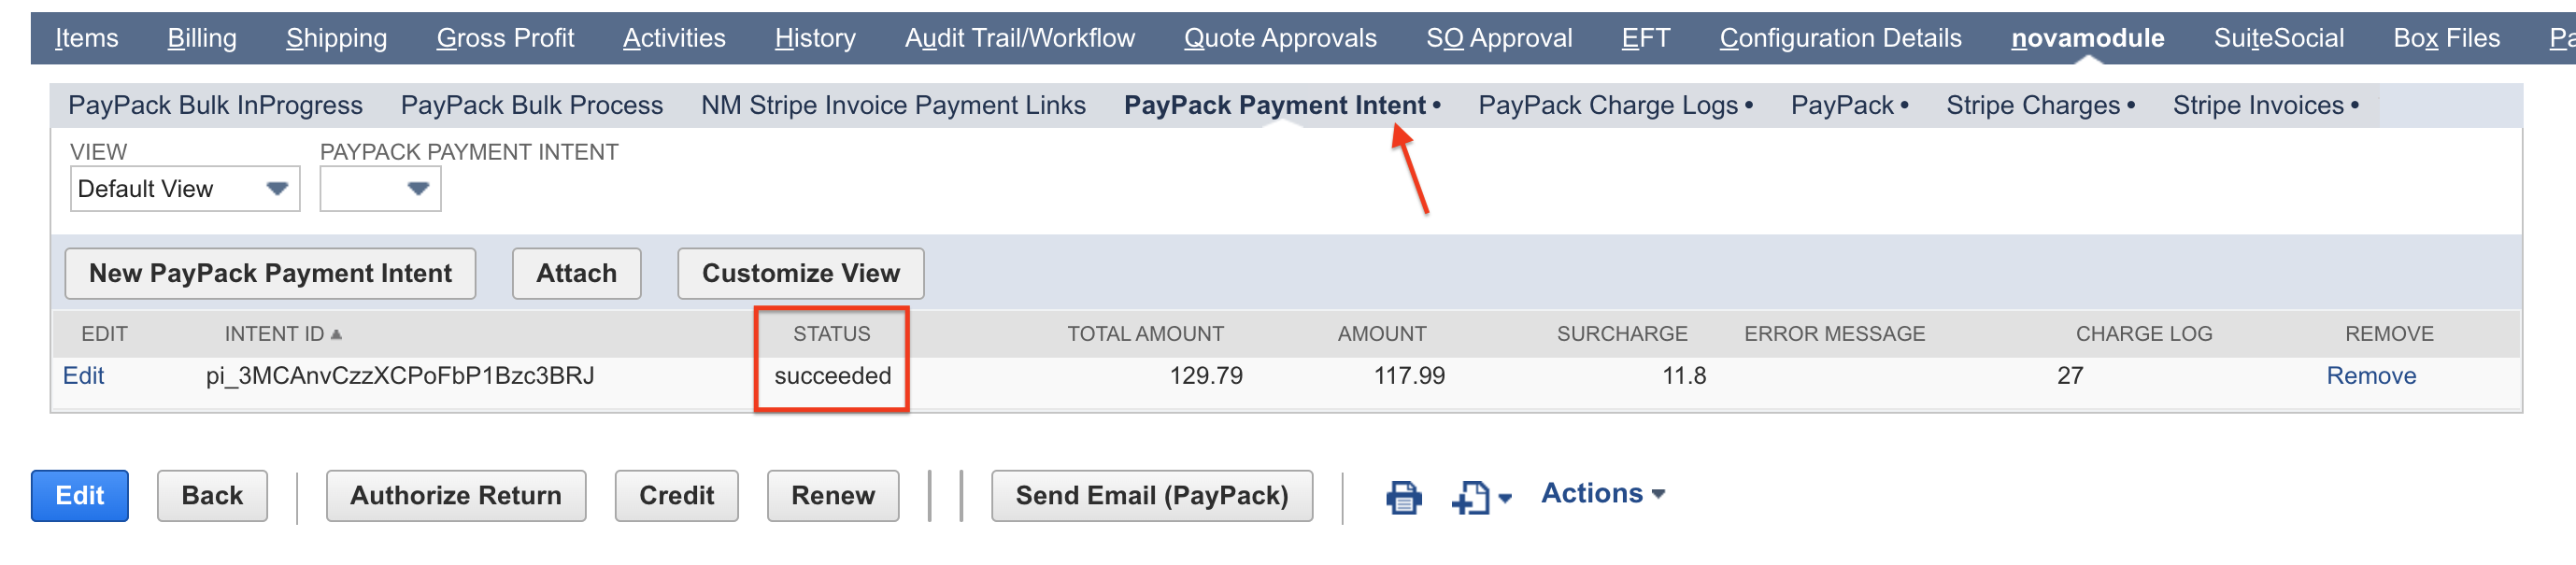 Invoice_Payment_Intent_Status.png